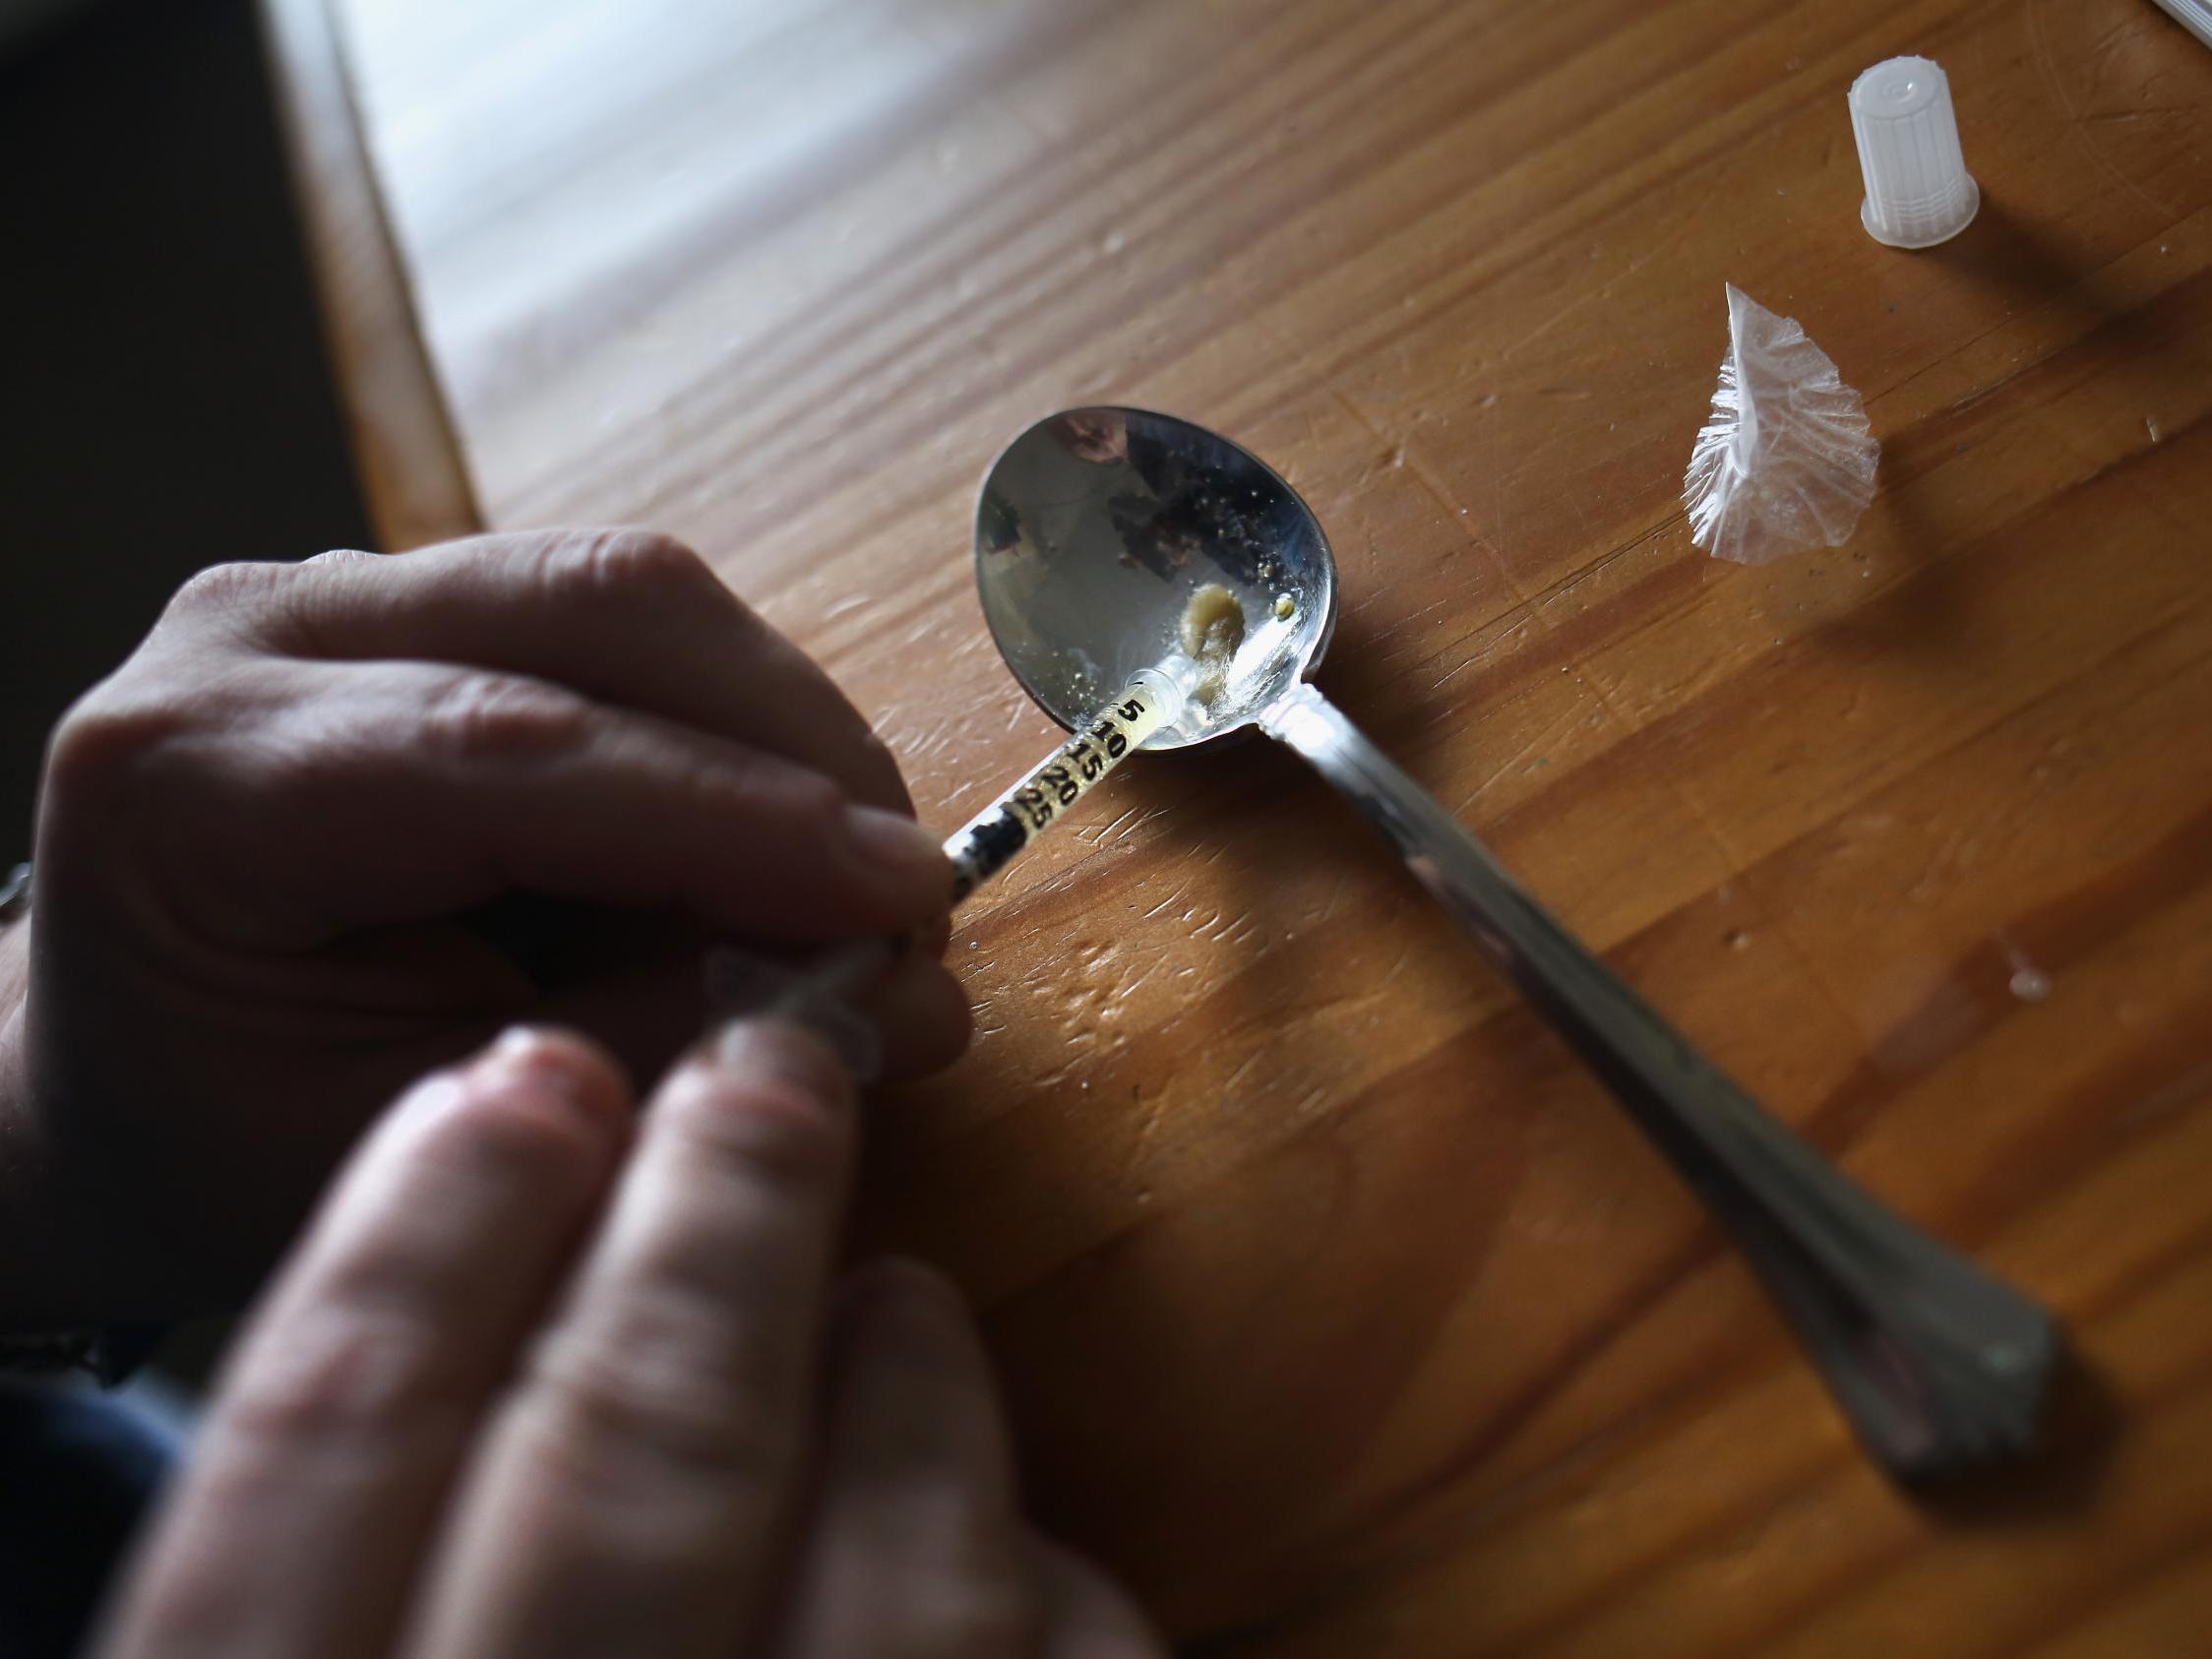 Middle-aged people dying from heroin and crack are being overlooked